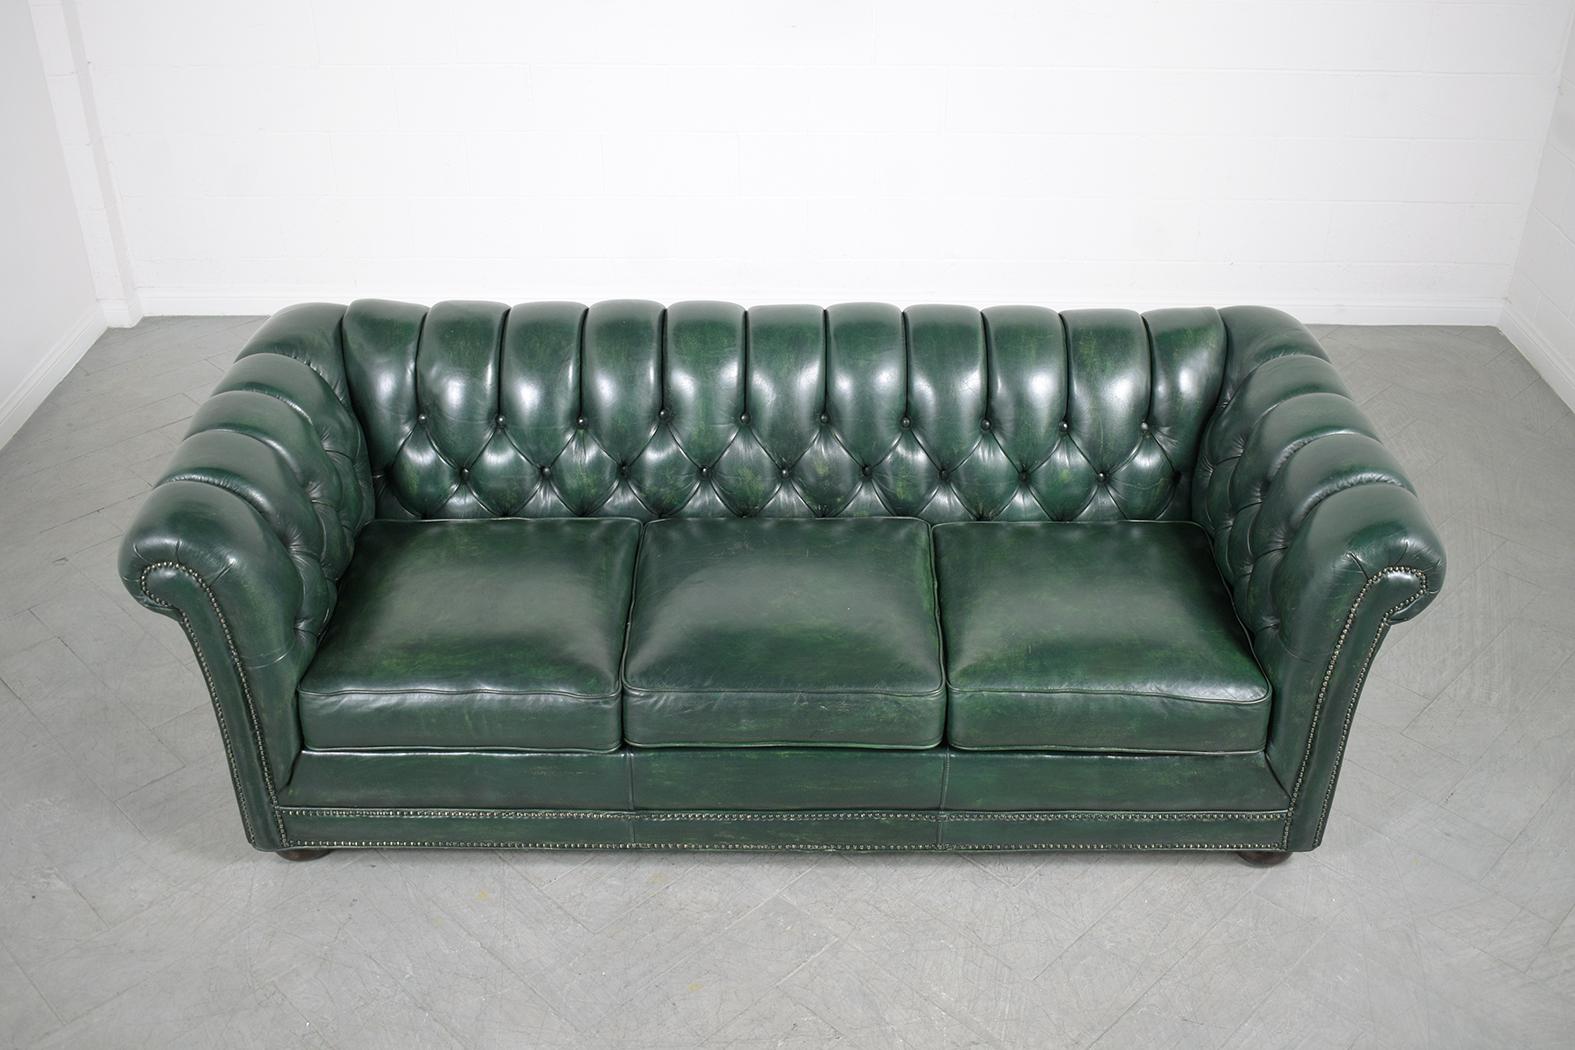 Lacquered Vintage Chesterfield Leather Sofa